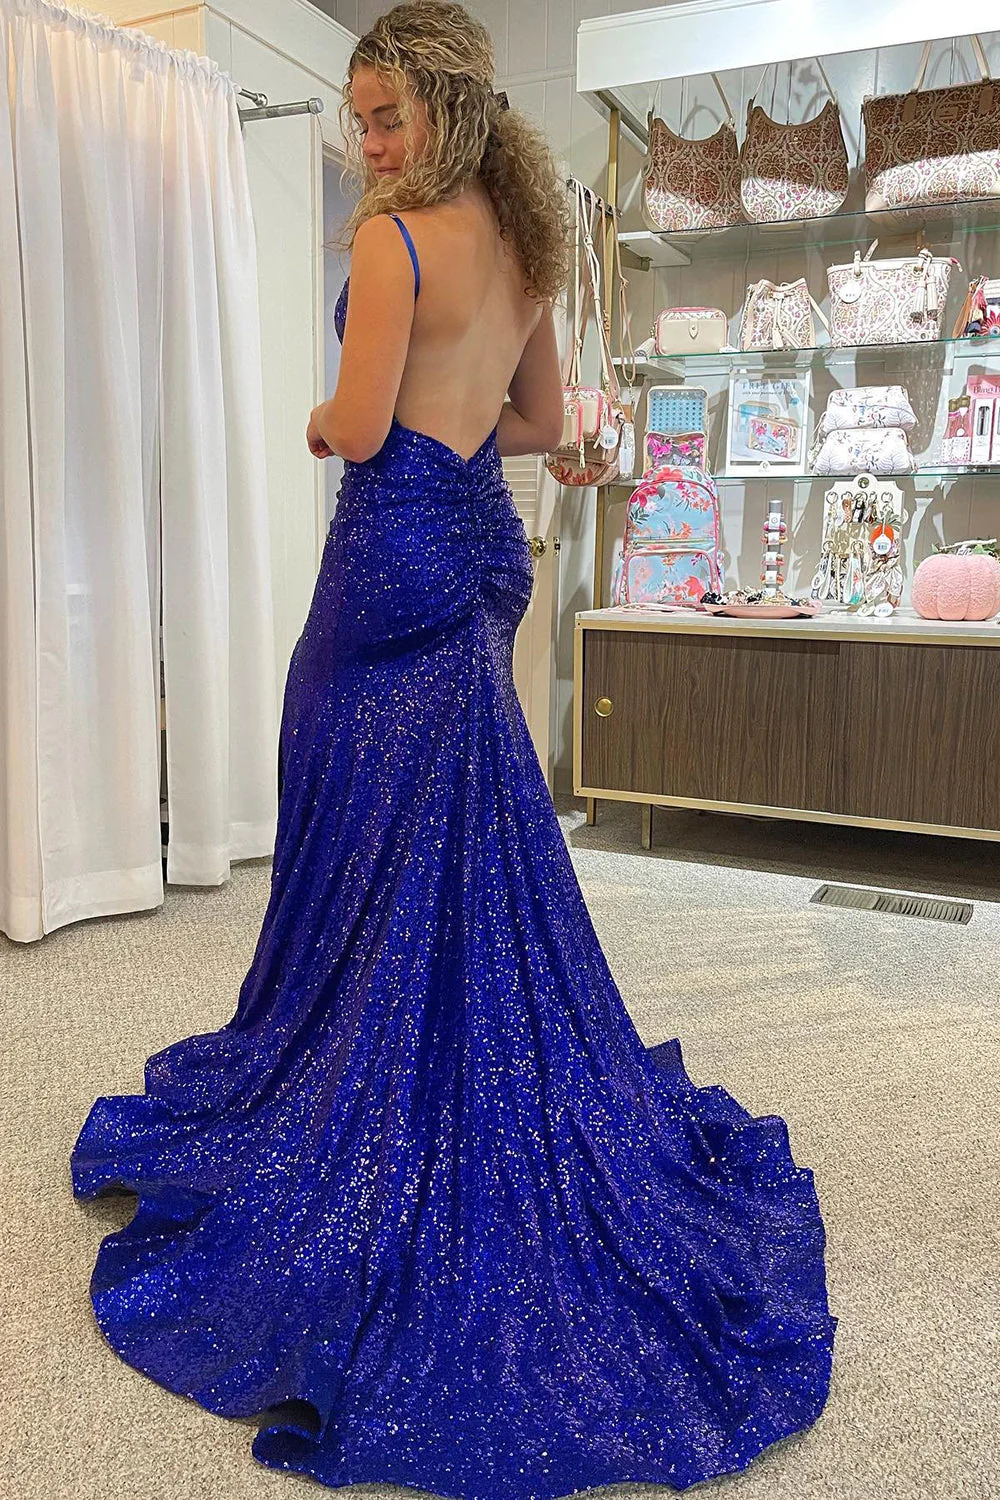 Mermaid Spaghetti Straps Royal Blue Sequins Long Prom Dress with Split Front nv678